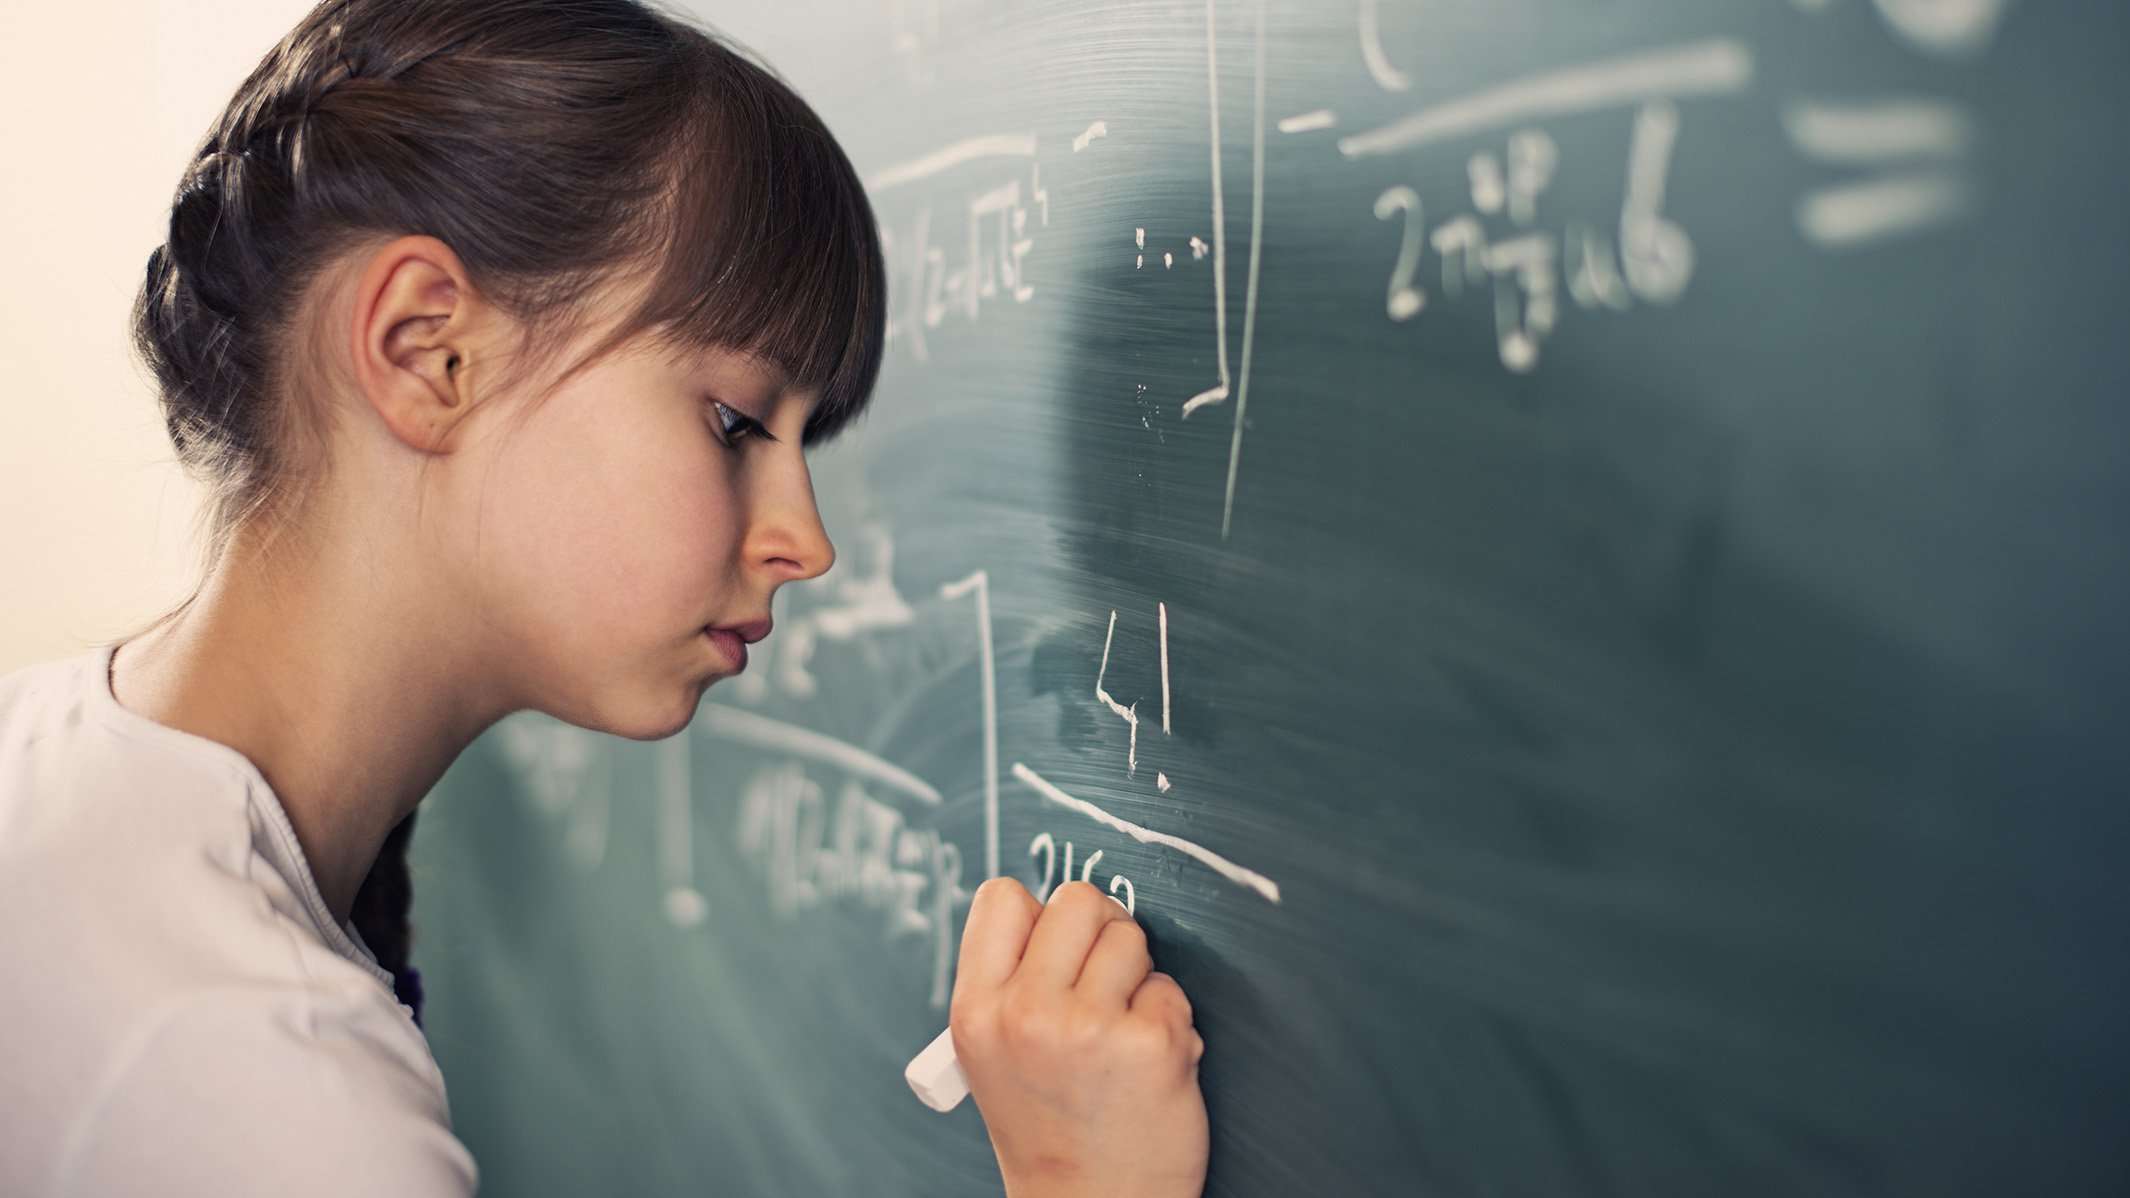 image for Girls’ superb verbal skills may contribute to the gender gap in math